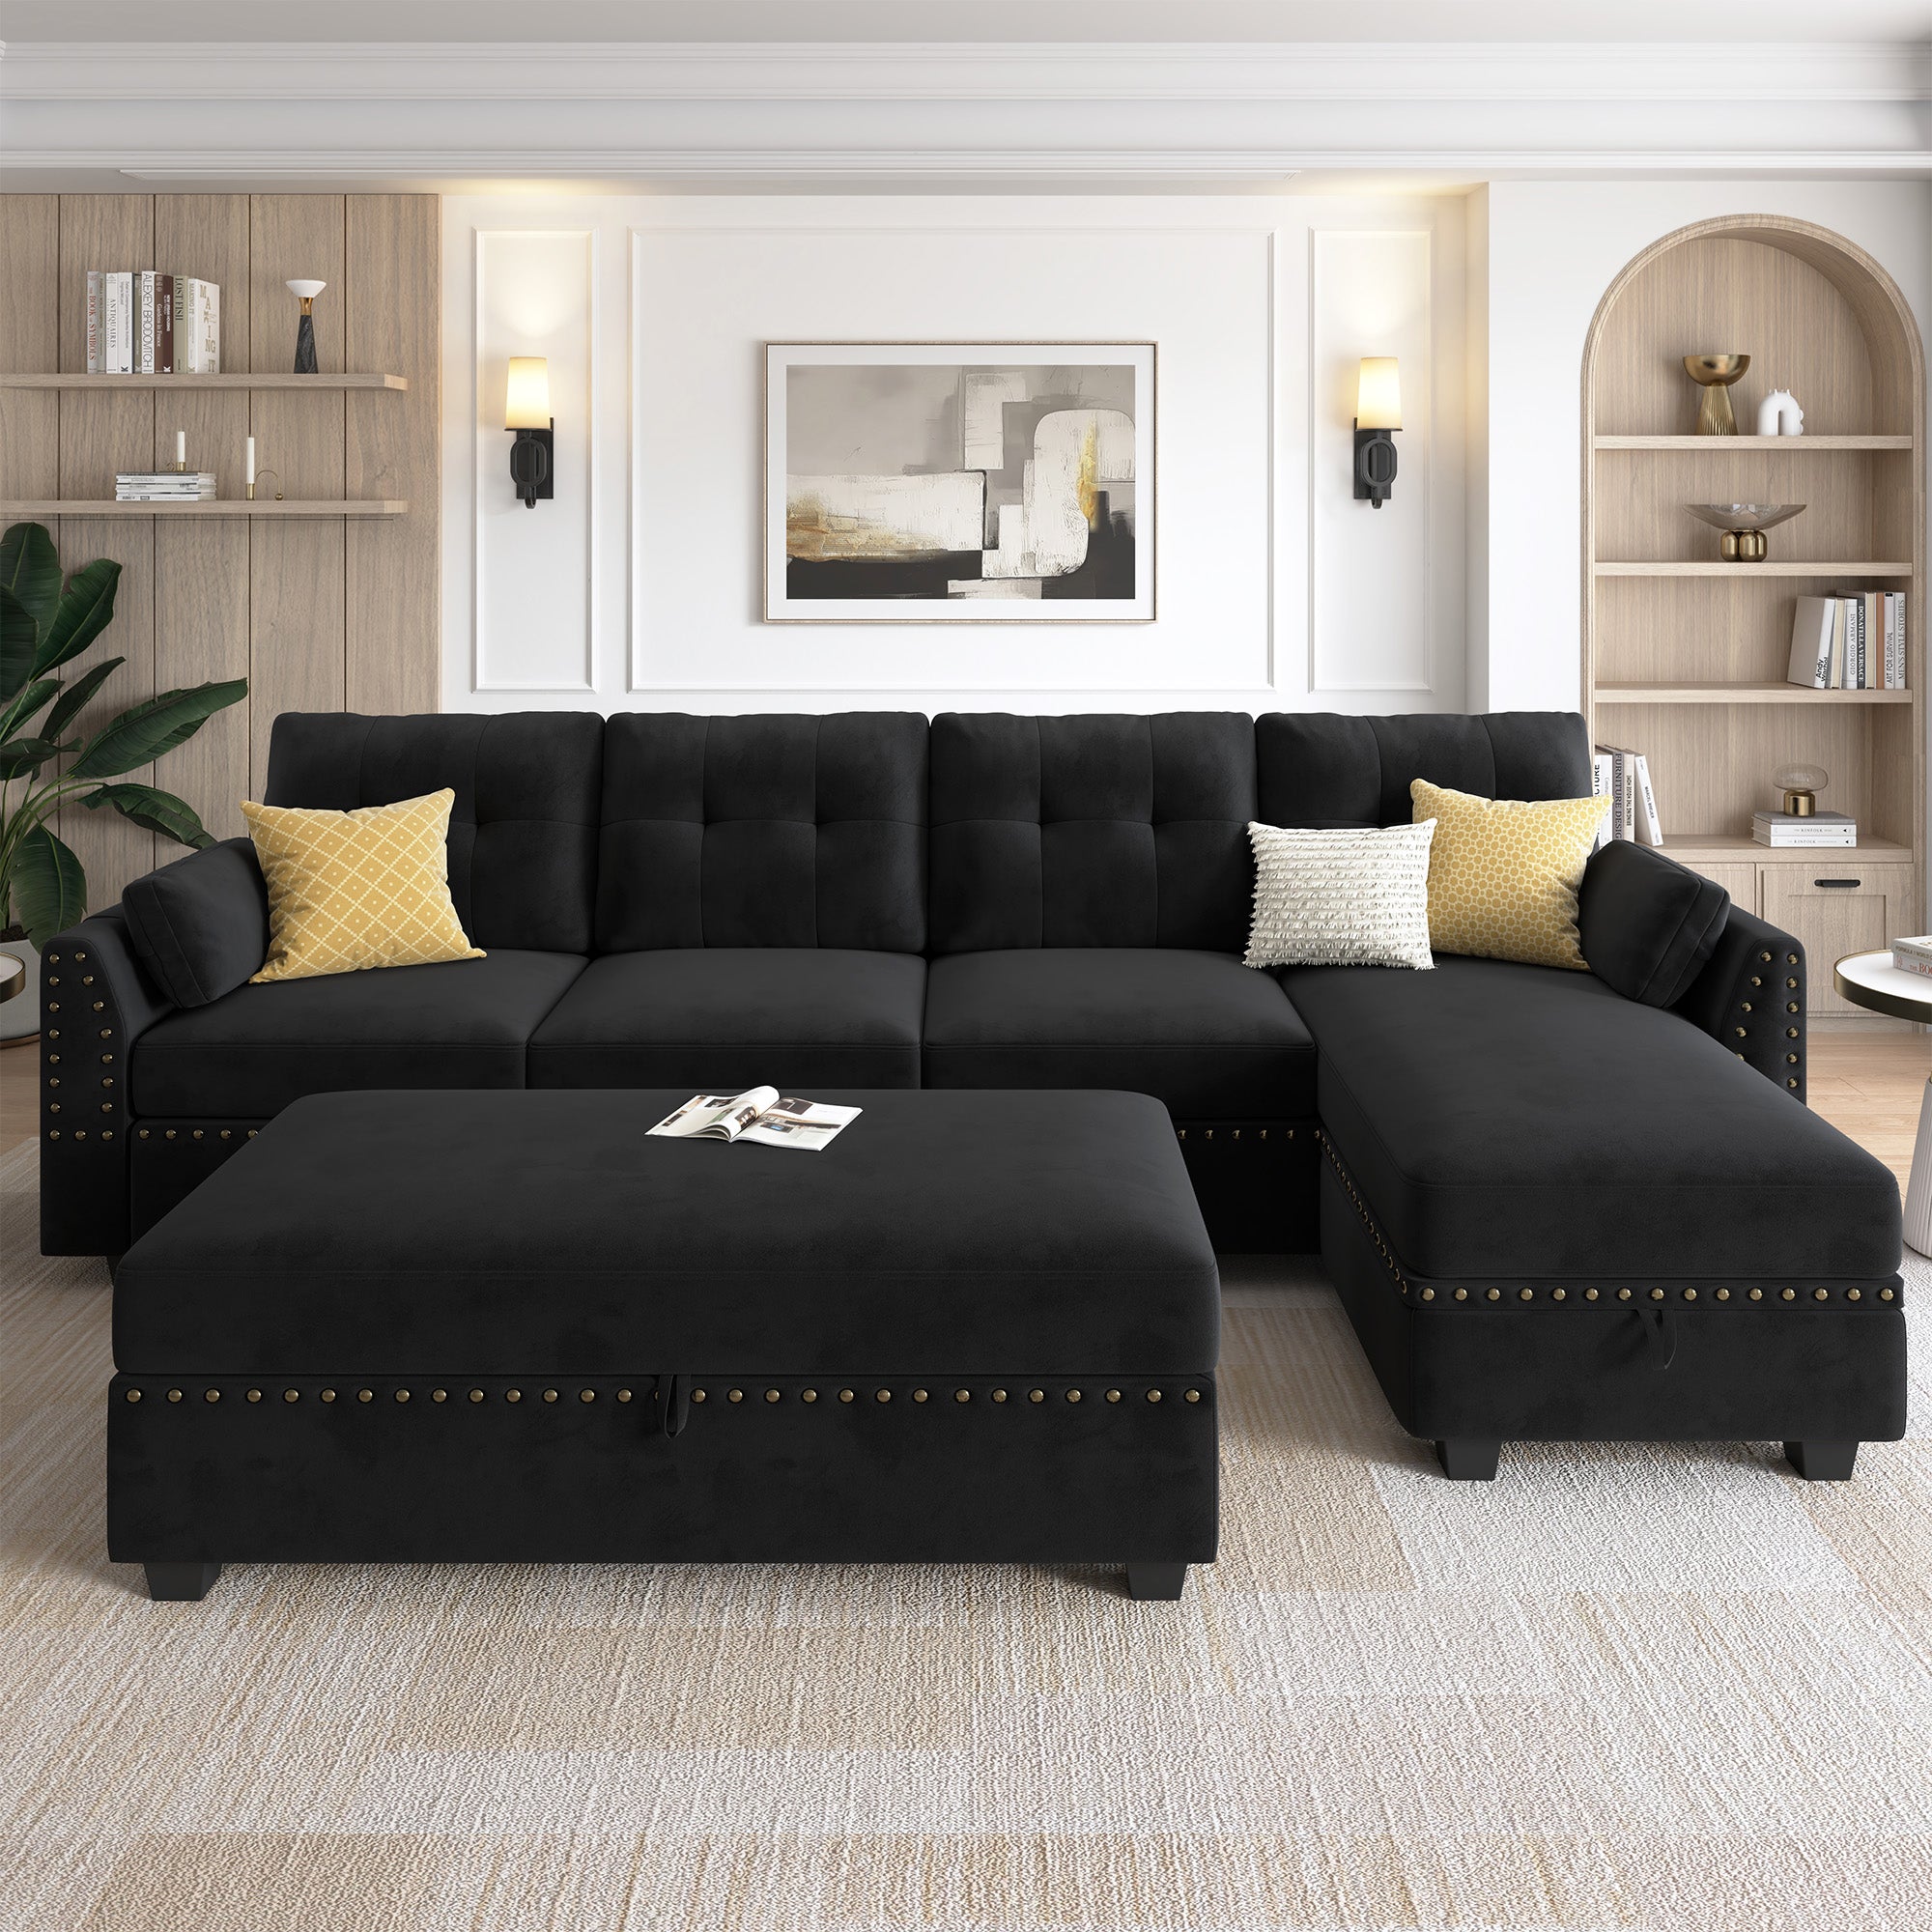 HONBAY 5-Piece Velvet Convertible Sectional With Storage Ottoman